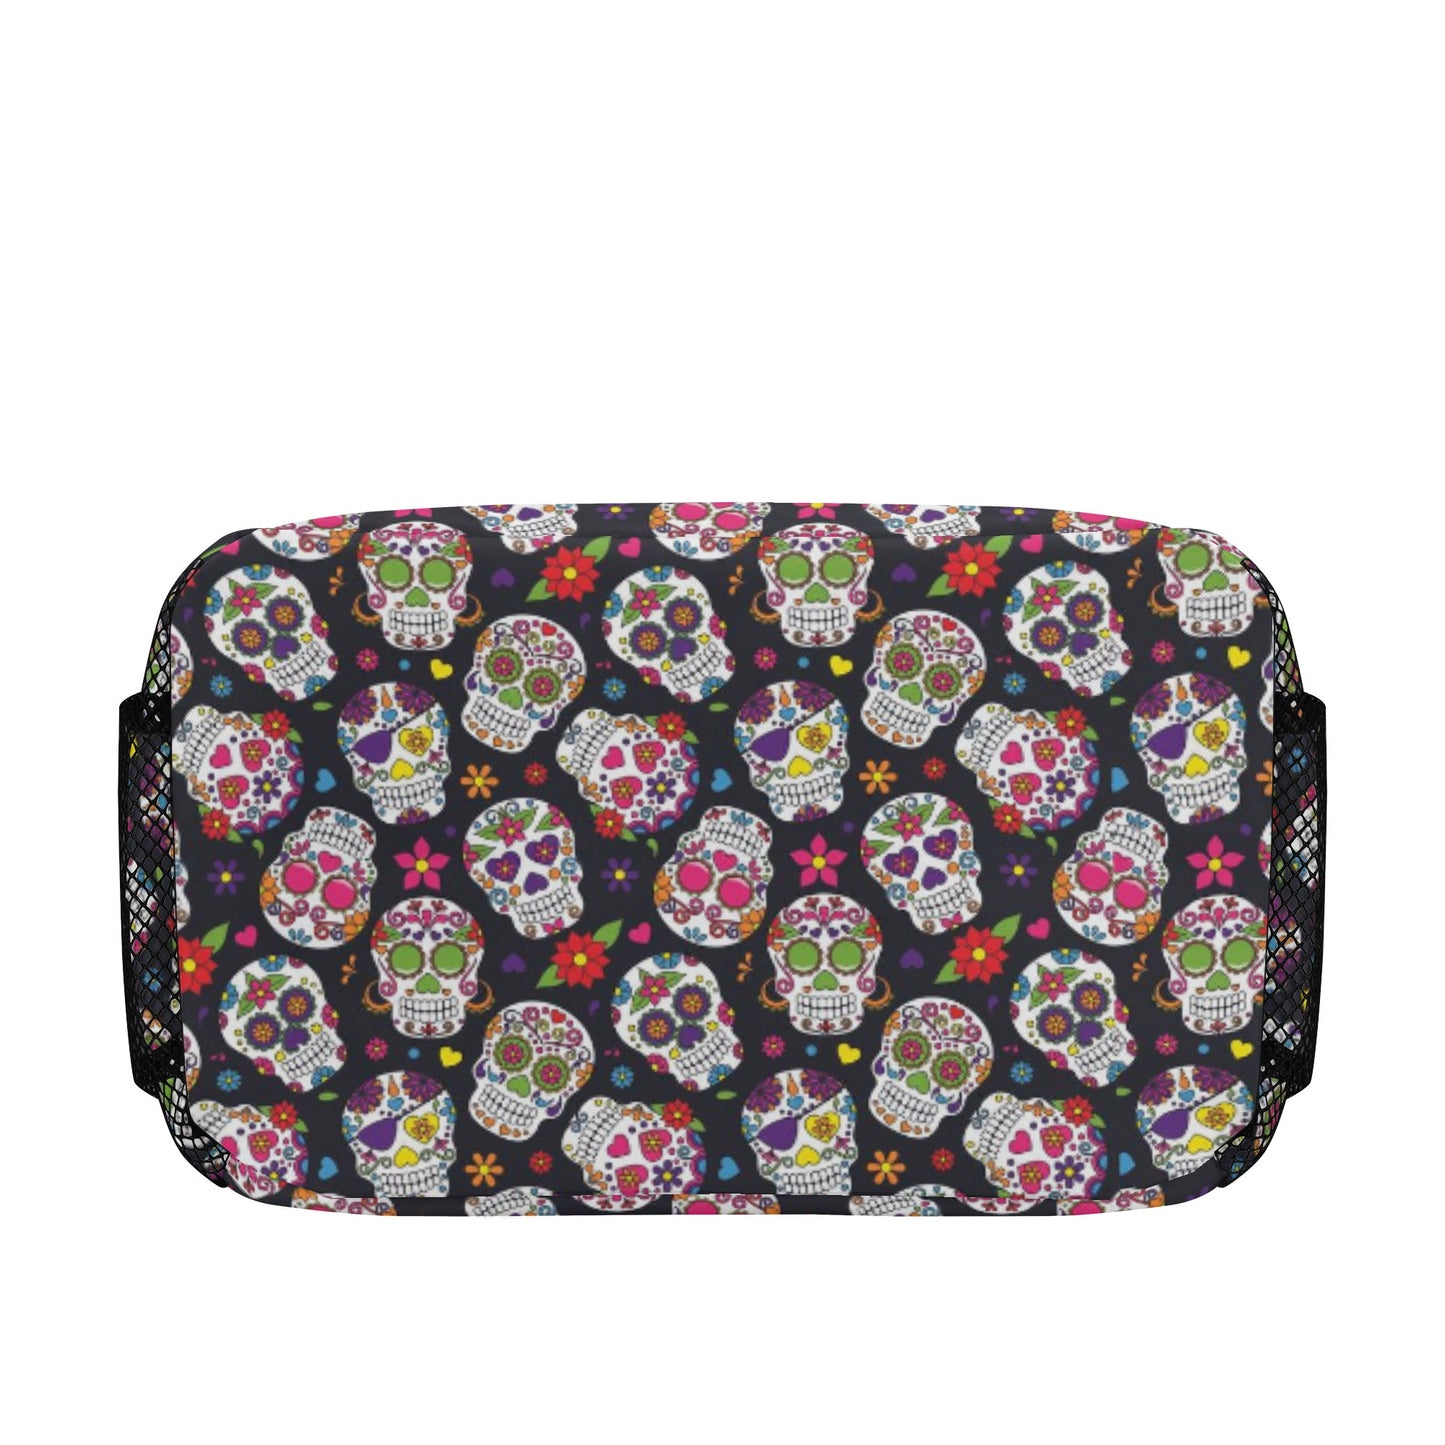 All Calaveras mexican skull pattern Over Printing Lunch Bag